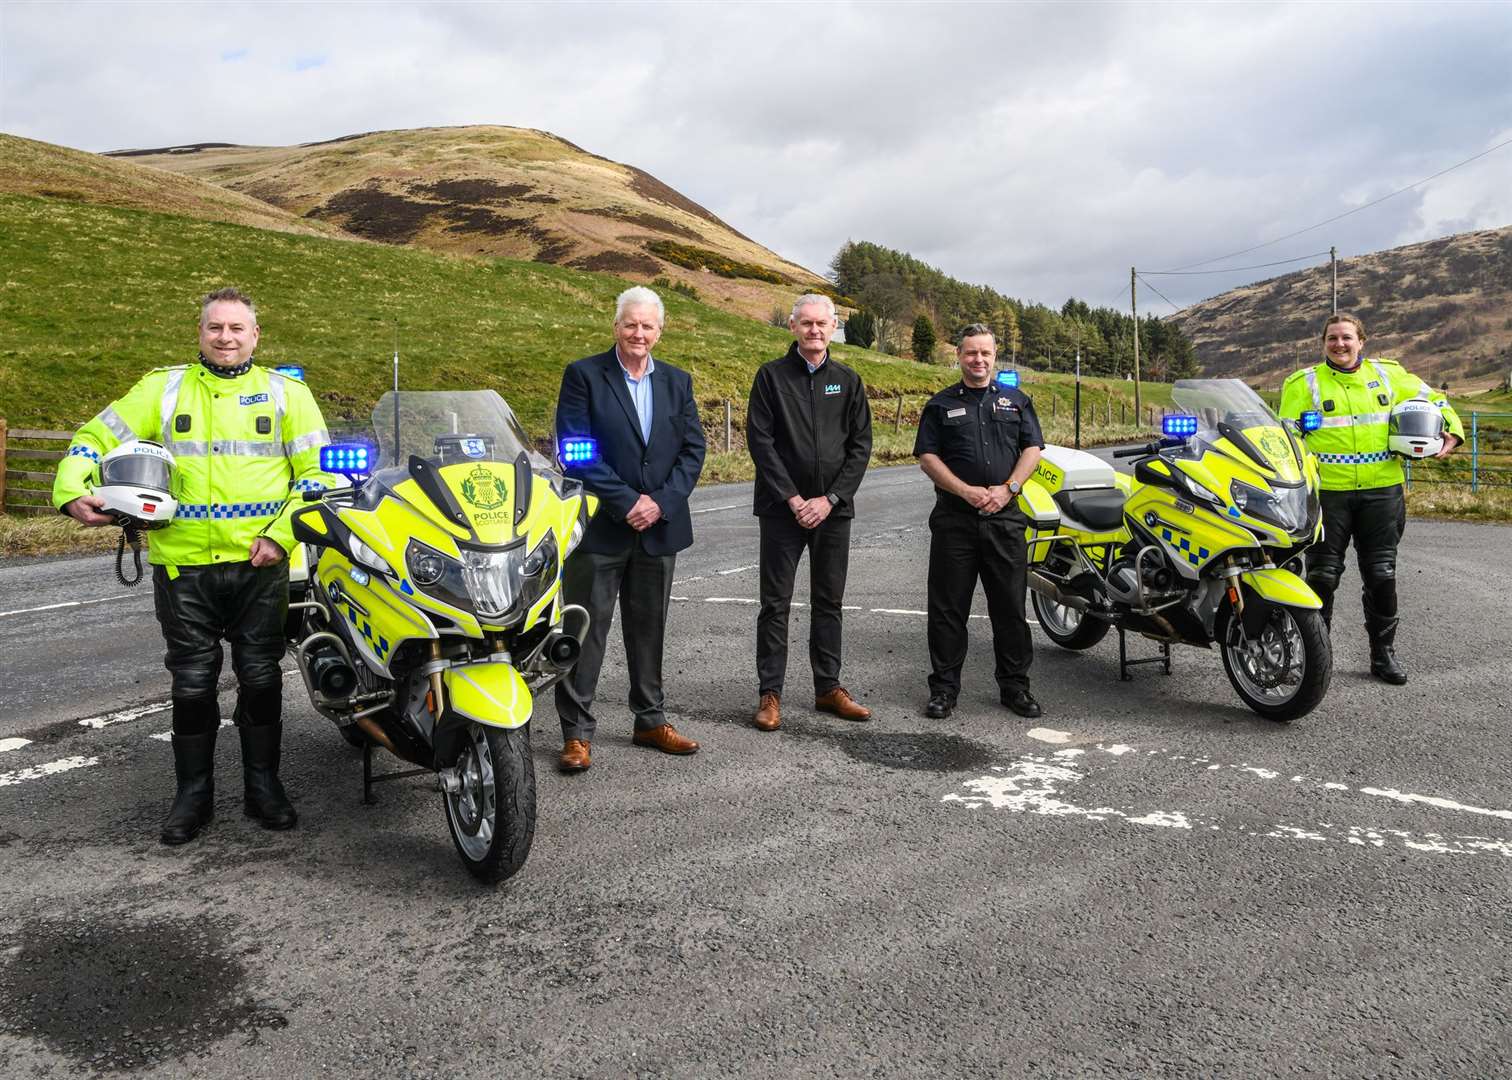 Hoping to help keep bikers safe on the roads are (from left0 Inspector Greg Burns, Michael McDonnell (Road Safety Scotland), Neil Greig (Institute of Advanced Motorists), Matthew McLay (Scottish Fire and Rescue) and PC Nicola Ross Advanced Motorcycle Instructor (Scottish Police College).